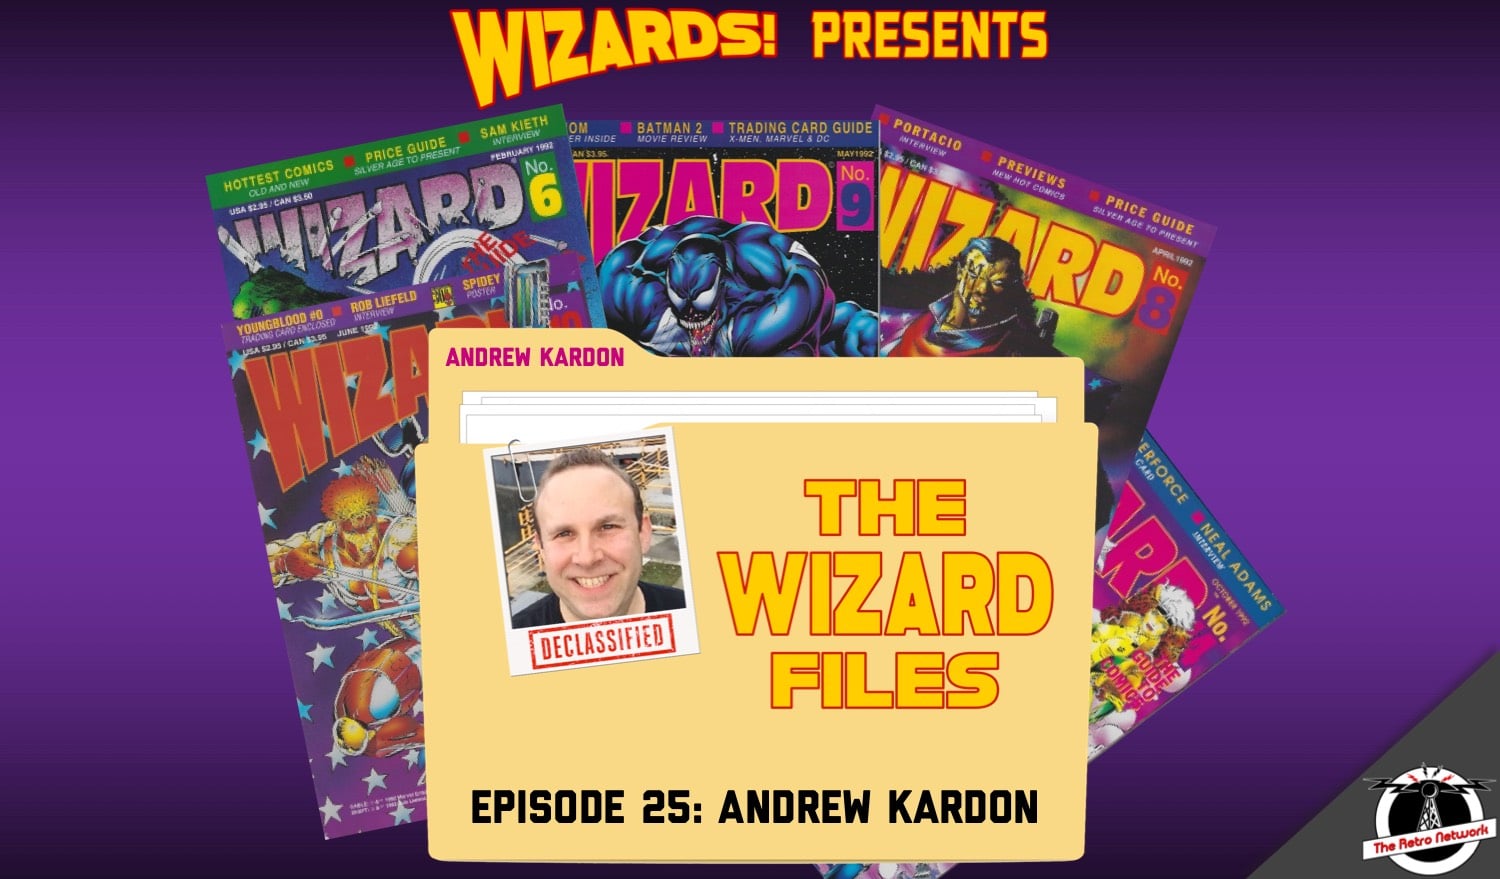 The Wizard Files